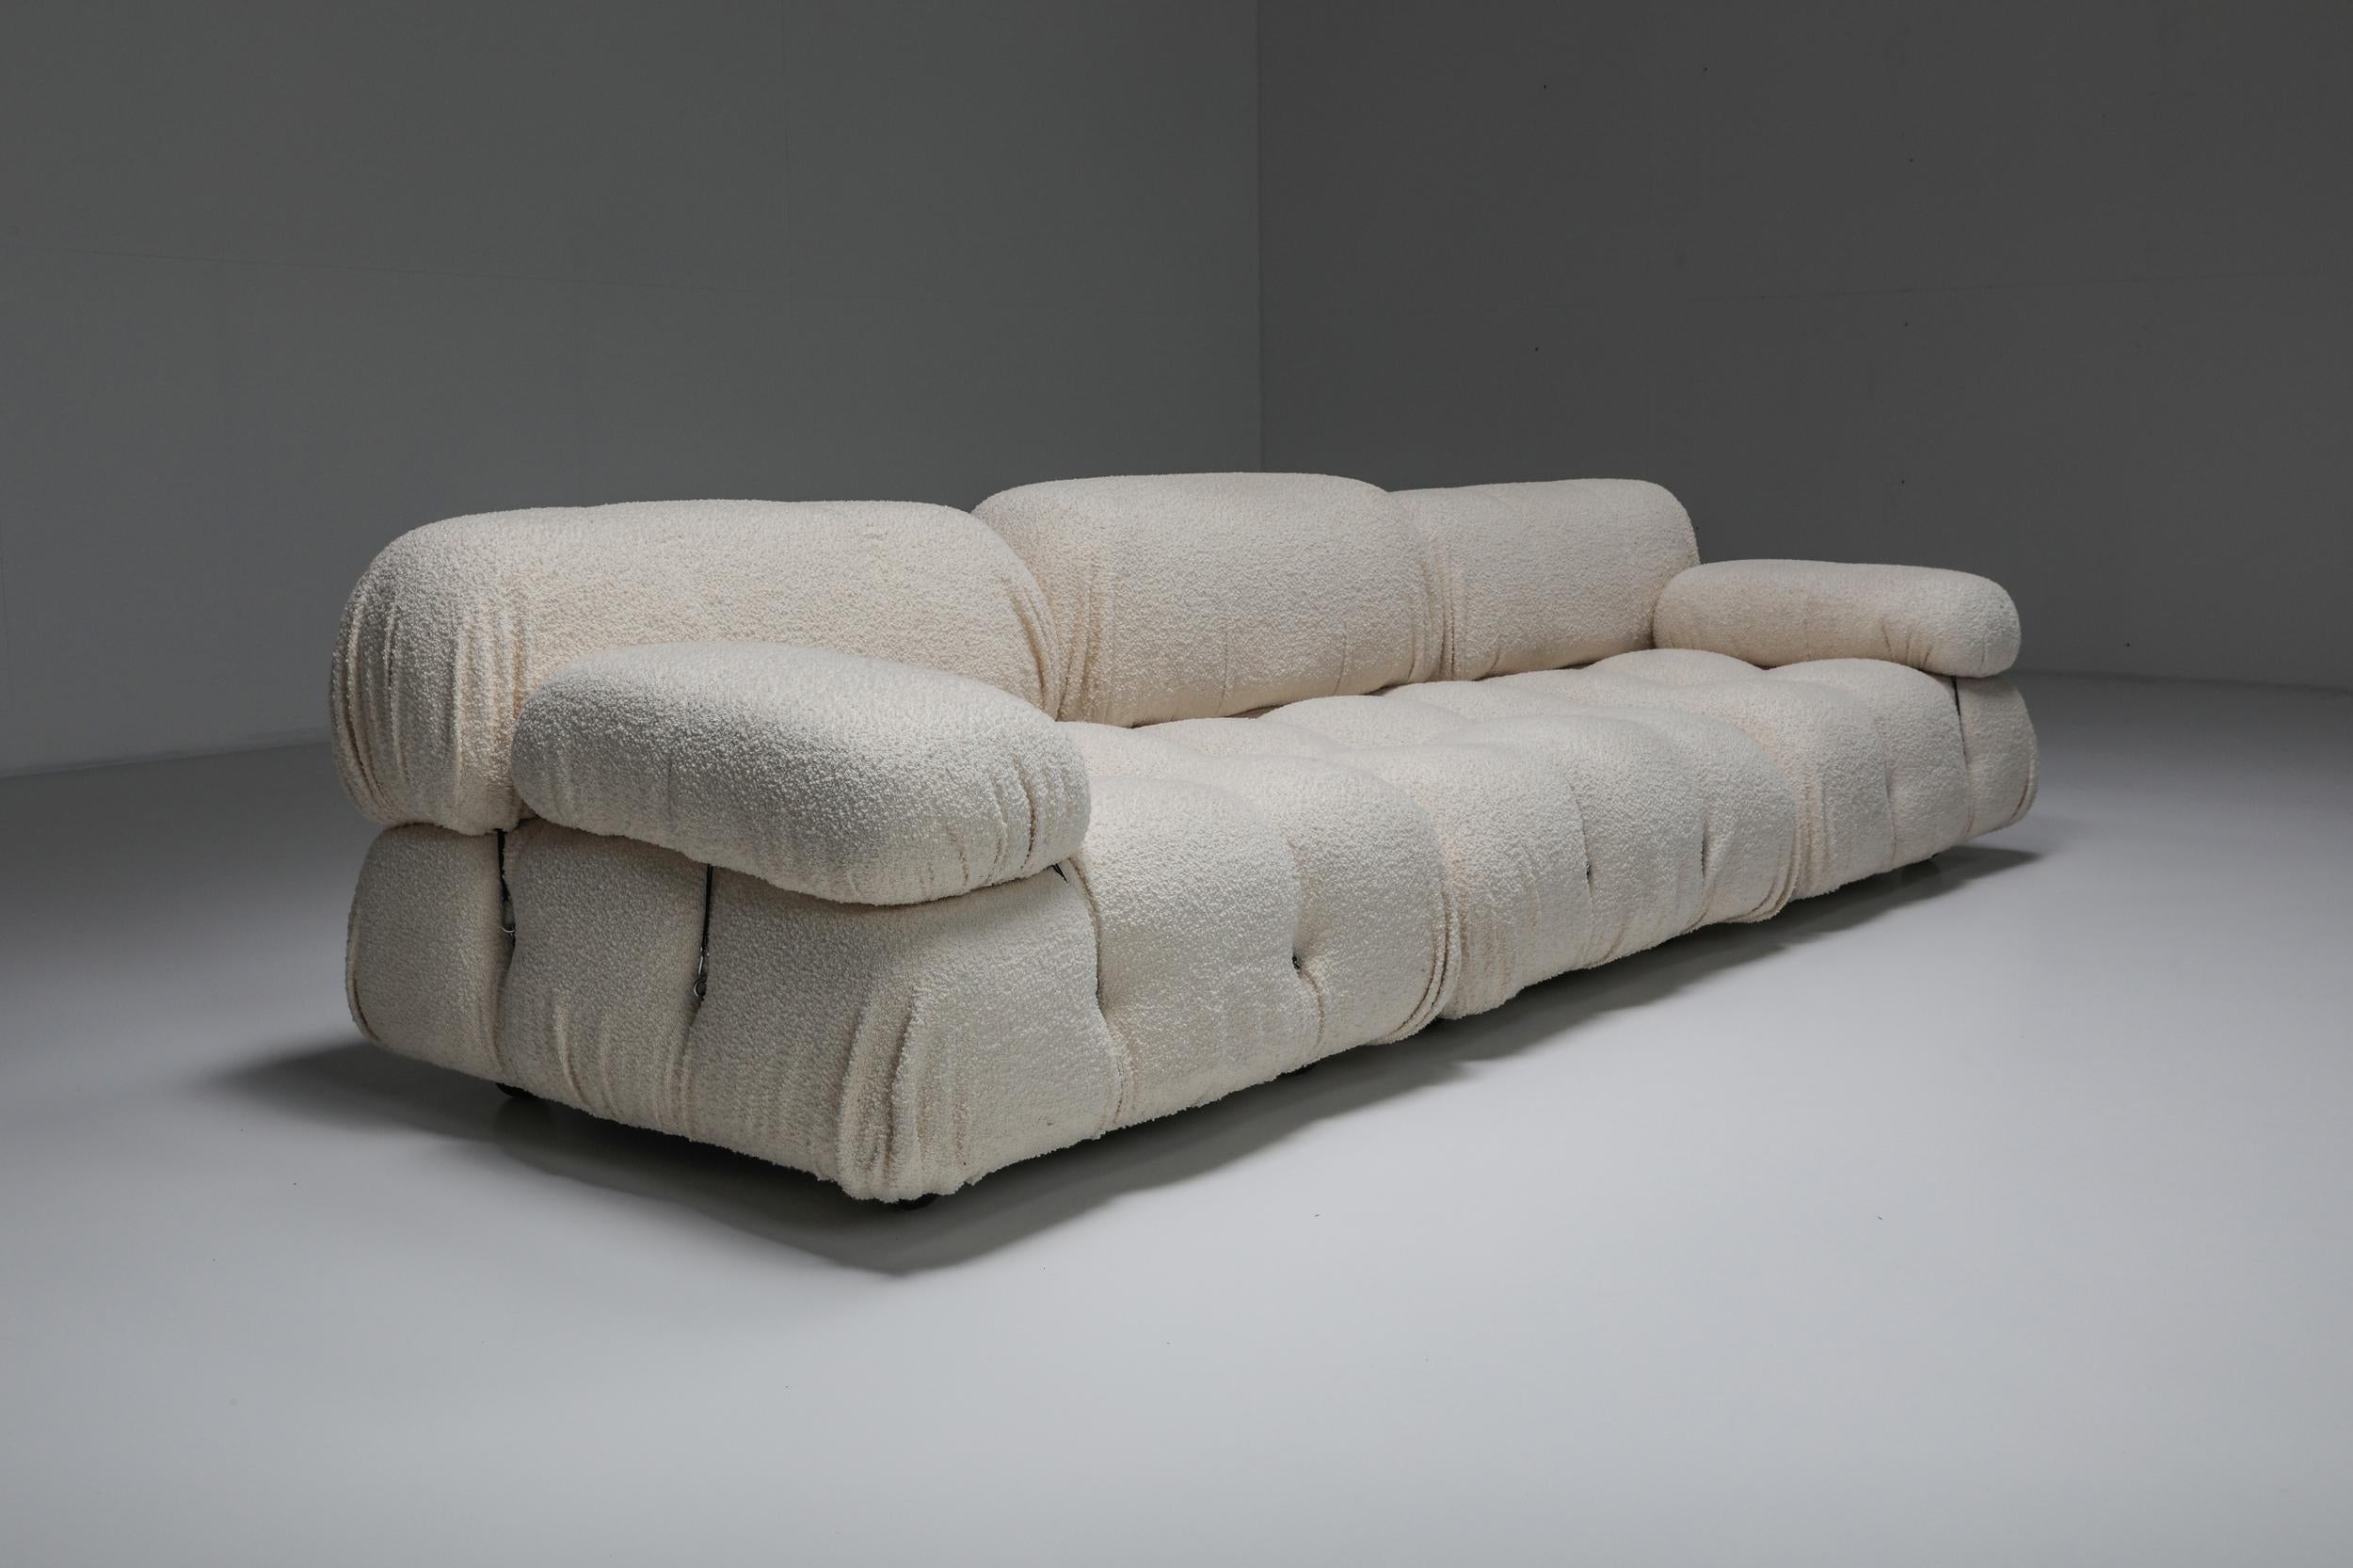 Mario Bellini, 'Cameleonda' sectional sofa in bouclé wool, Italy, 1972.

Re-upholstered Camaleonda piece by Mario Bellini.
The listing includes two seating cushions, two back cushions and two arm rests.
Ask about extra modules
This design